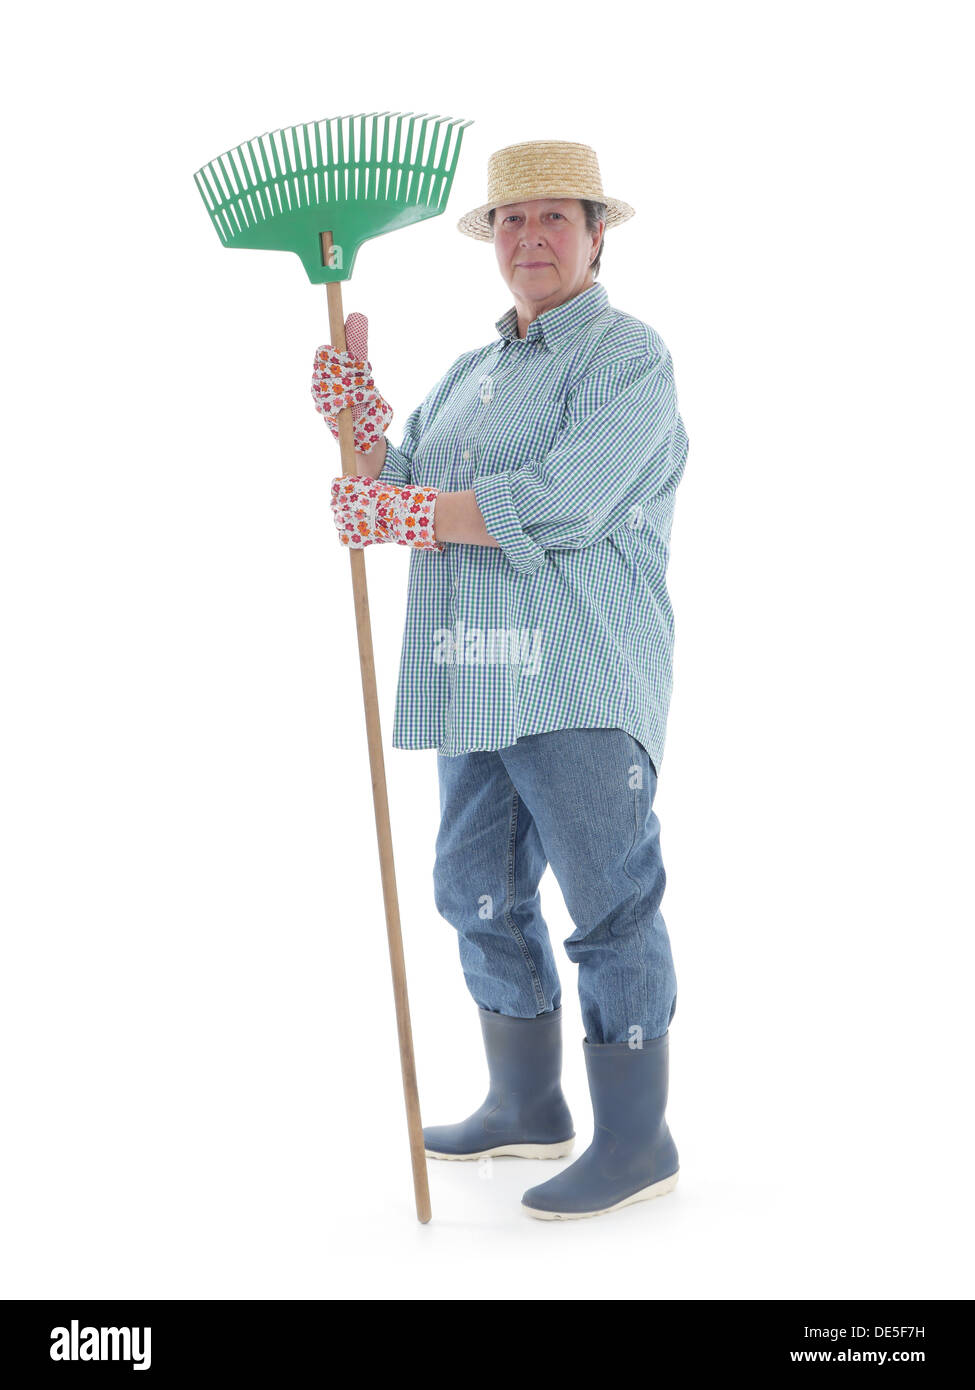 Senior woman gardener wearing straw hat and rubber boots posing with rake over white background Stock Photo